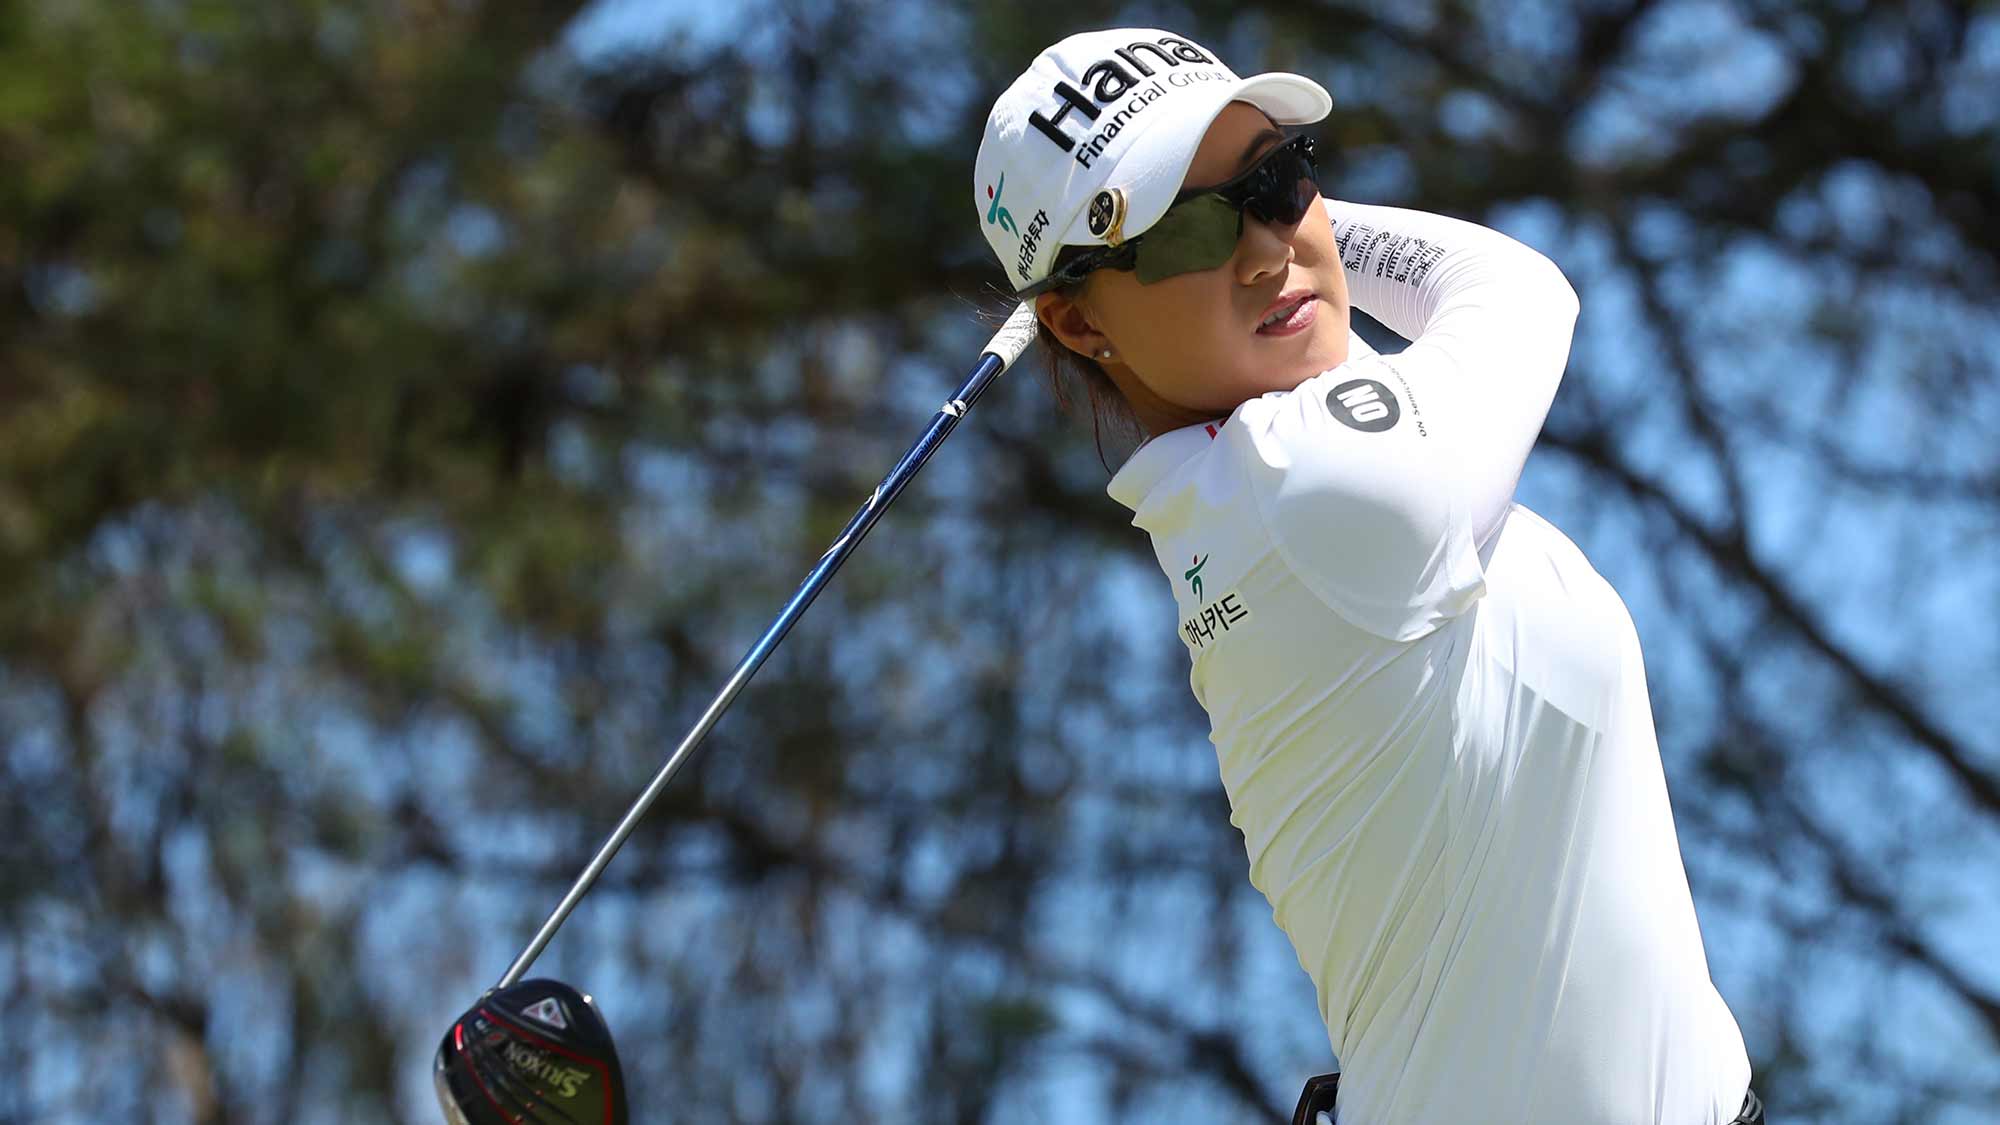 Minjee Lee of Australia watches her drive on the fifth hole during the third round of the LOTTE Championship on April 20, 2019 in Kapolei, Hawaii